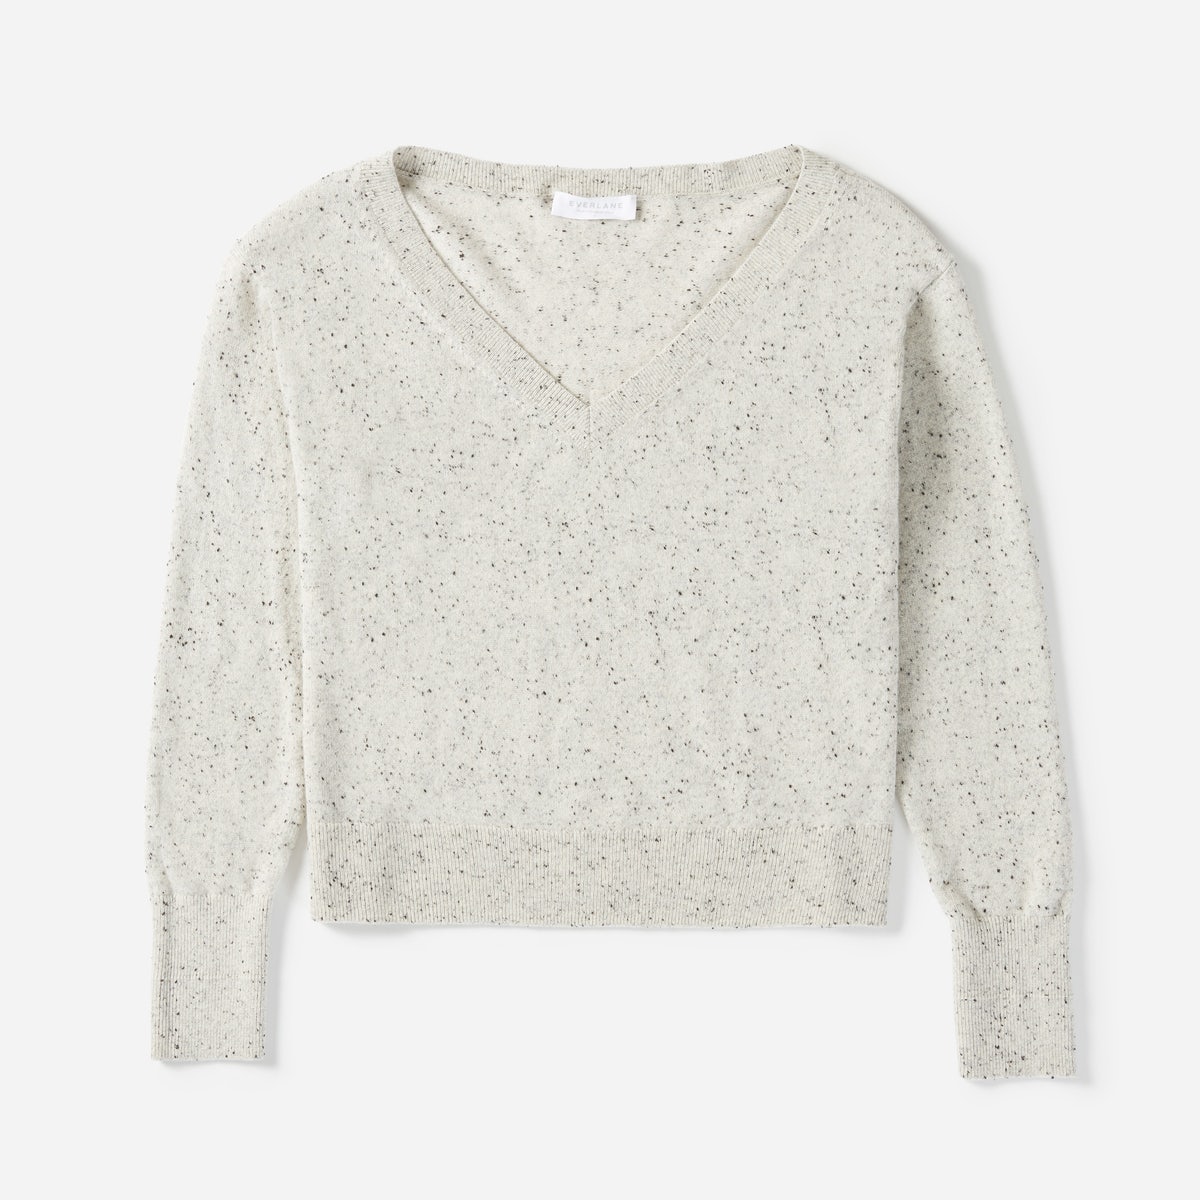 Everlane Cashmere Crop V-neck sweater in frost donegal, a light gray with dark specks.